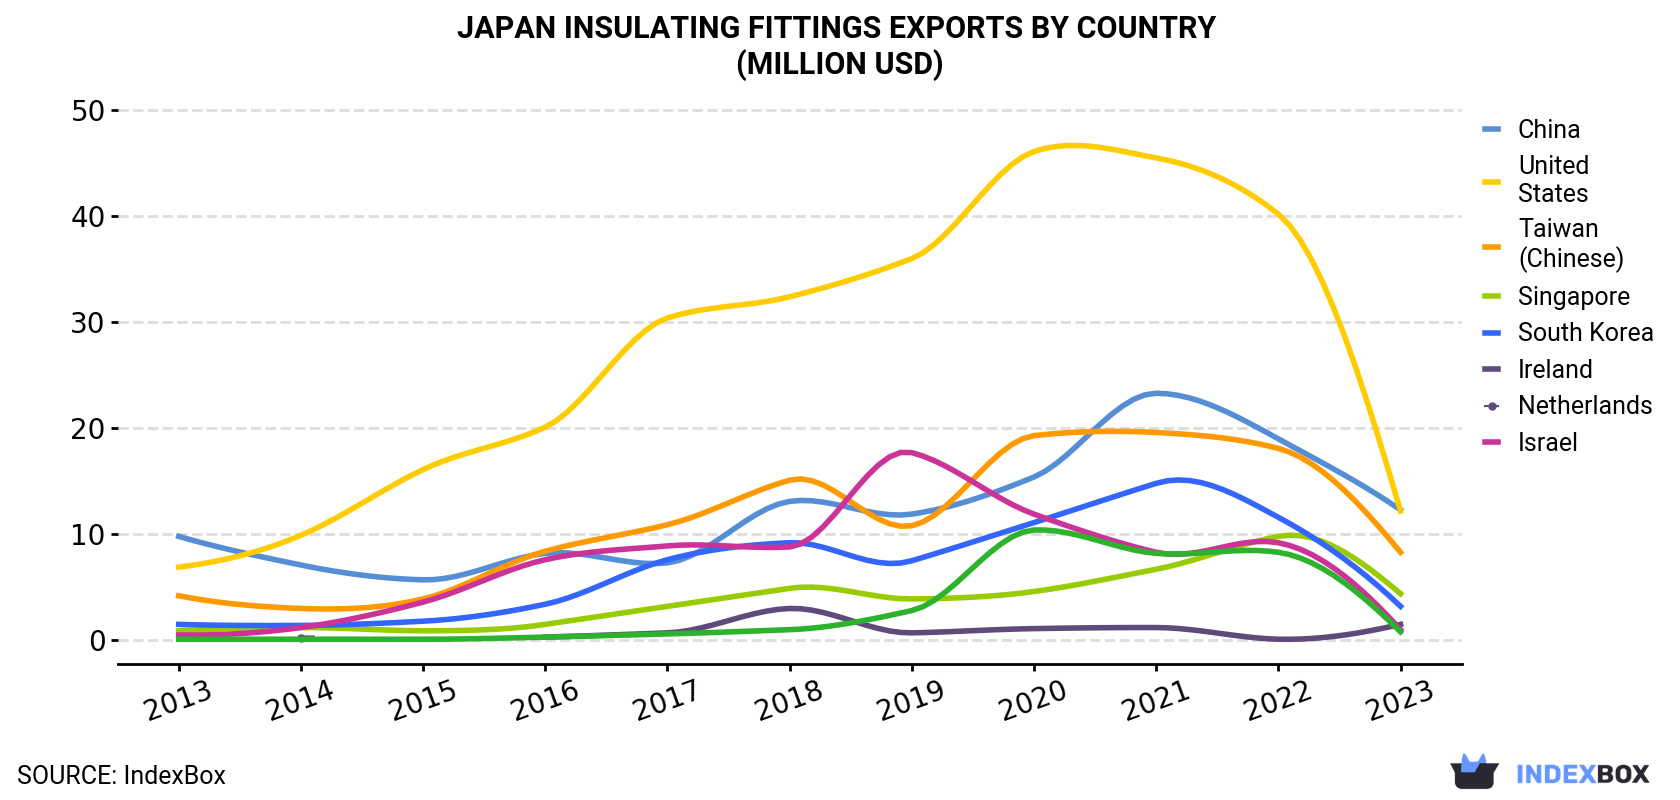 Japan Insulating Fittings Exports By Country (Million USD)